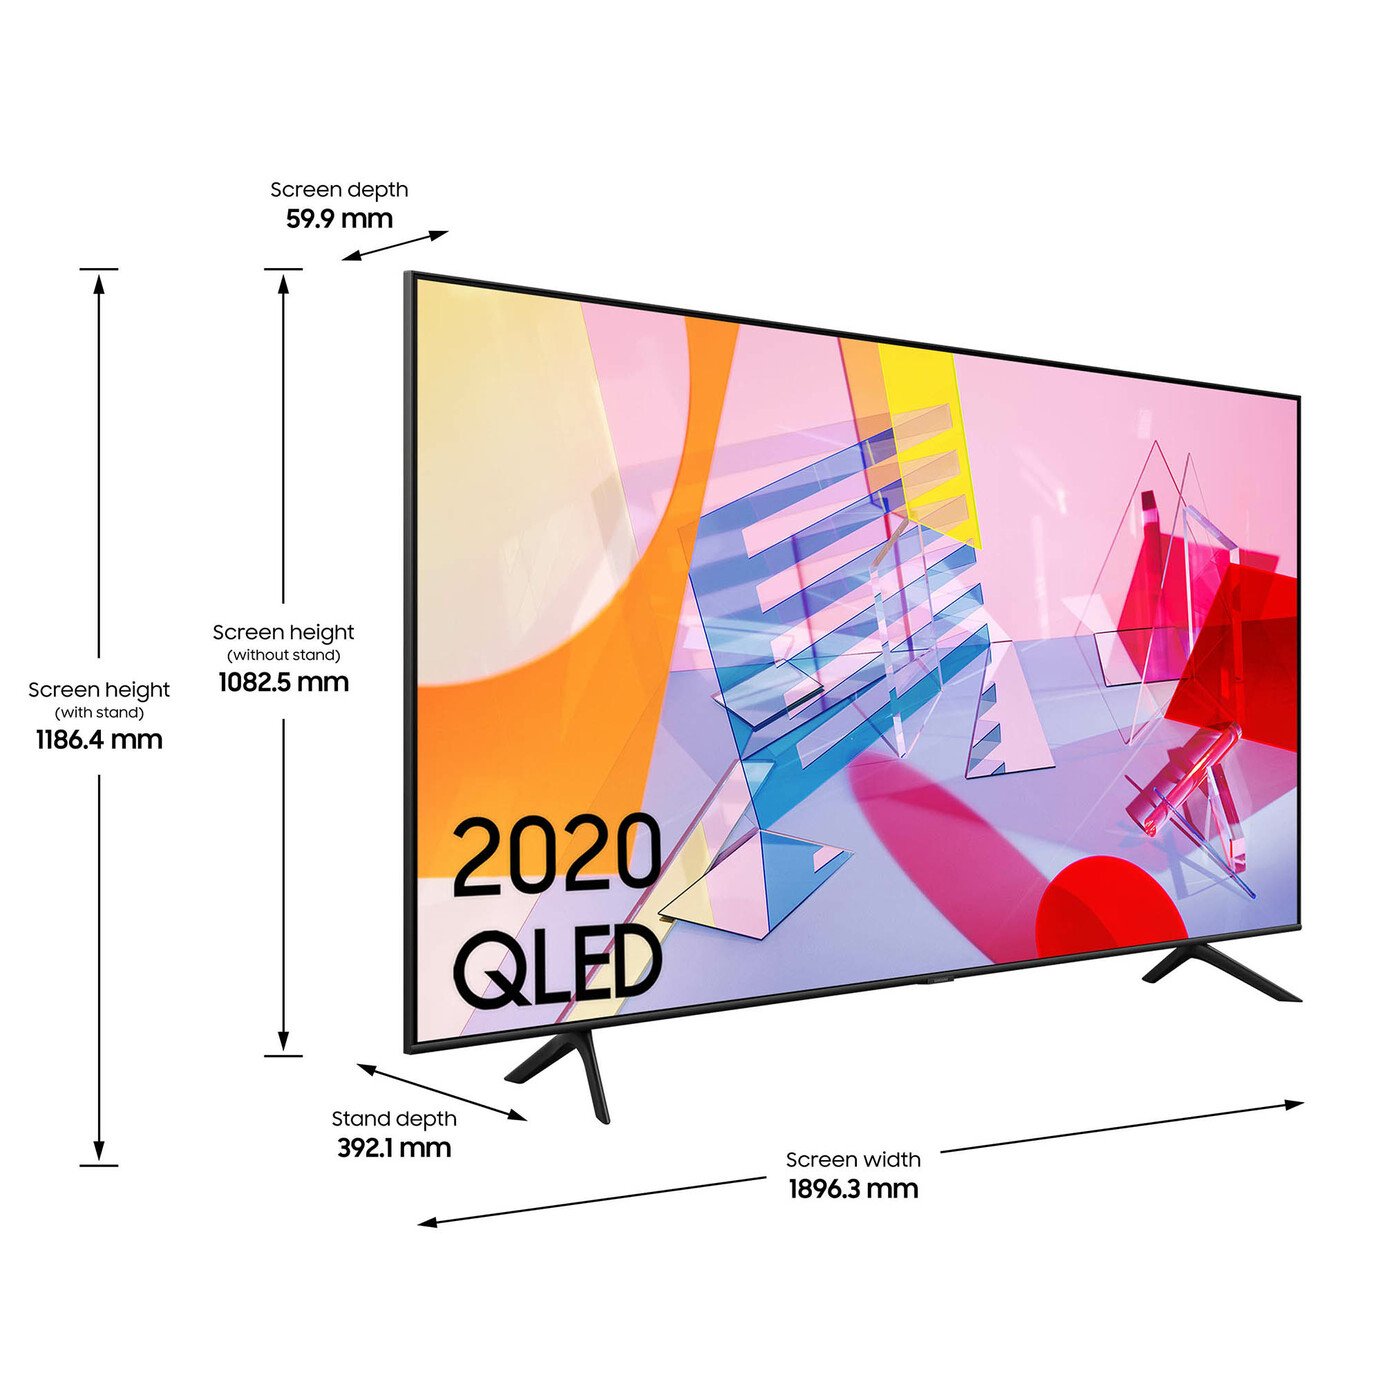 Samsung 85 Inch QE85Q60T Smart Ultra HD QLED TV with HDR Review